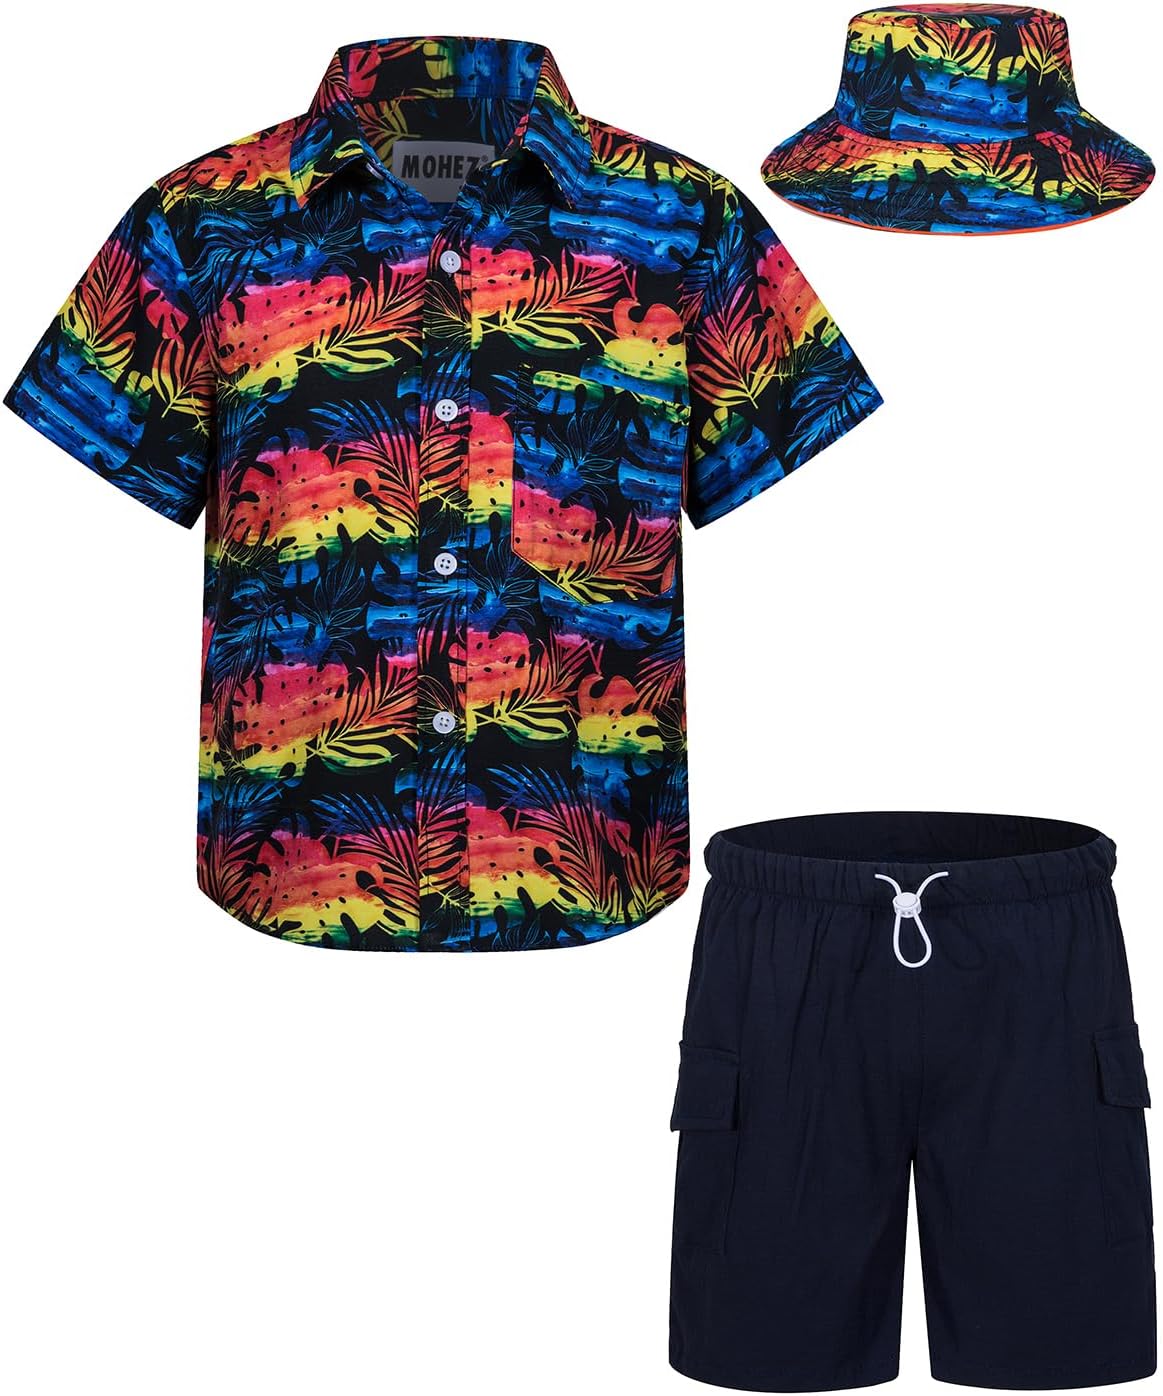 Boys Hawaiian Shirt and Short Set Summer Outfit Kids 2 Piece Clothes Set With Bucket Hat